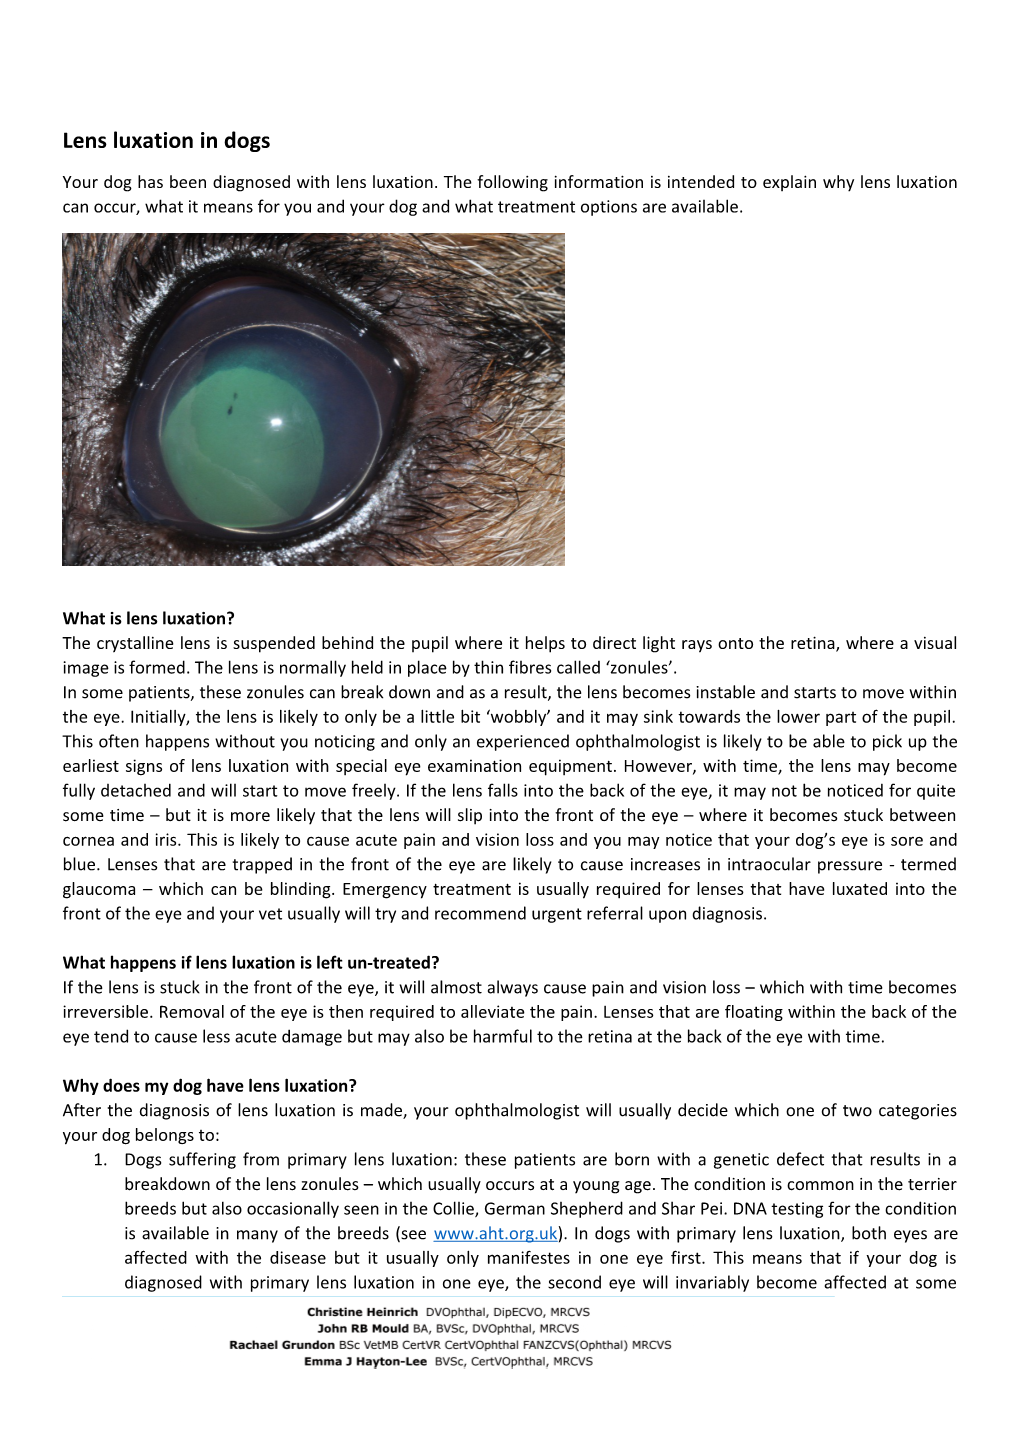 Lens Luxation in Dogs